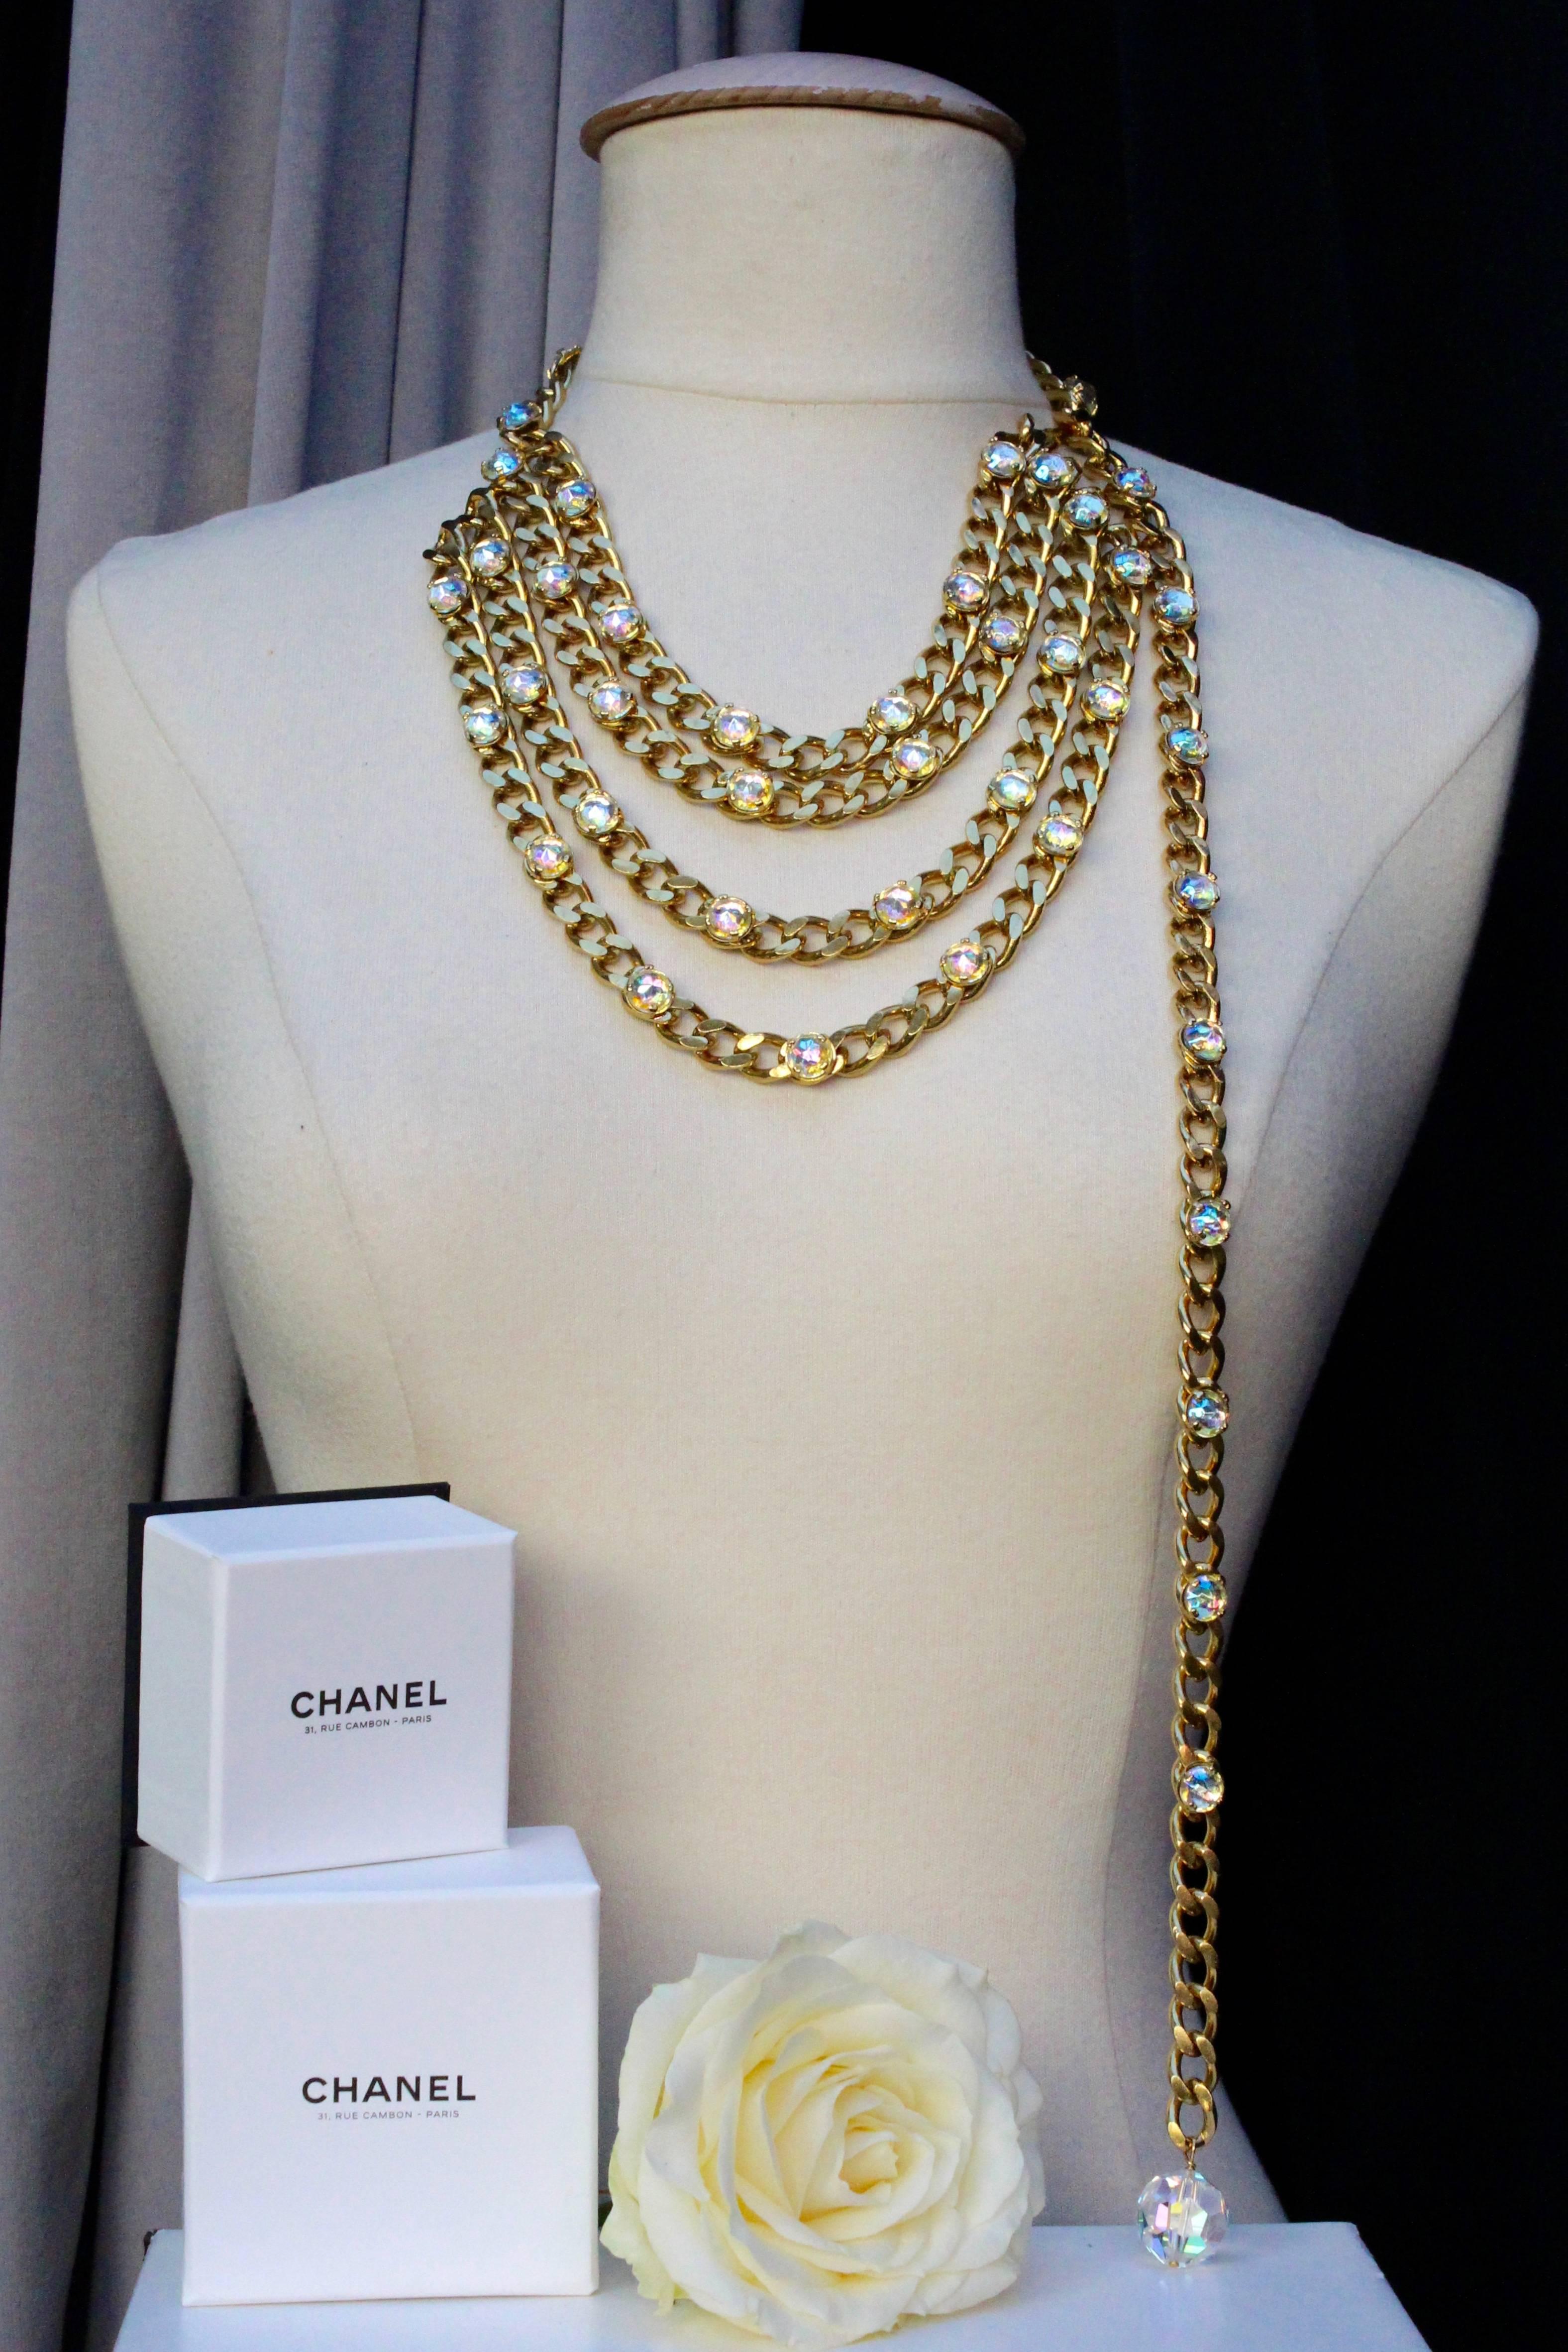 CHANEL (Made in France) Stunning gilded metal belt composed of a wide curb chain decorated with large Swarovski crystals. It features a front drapé made of four strands of chain. It is finished with a large faceted crystal.

It can be worn as a belt